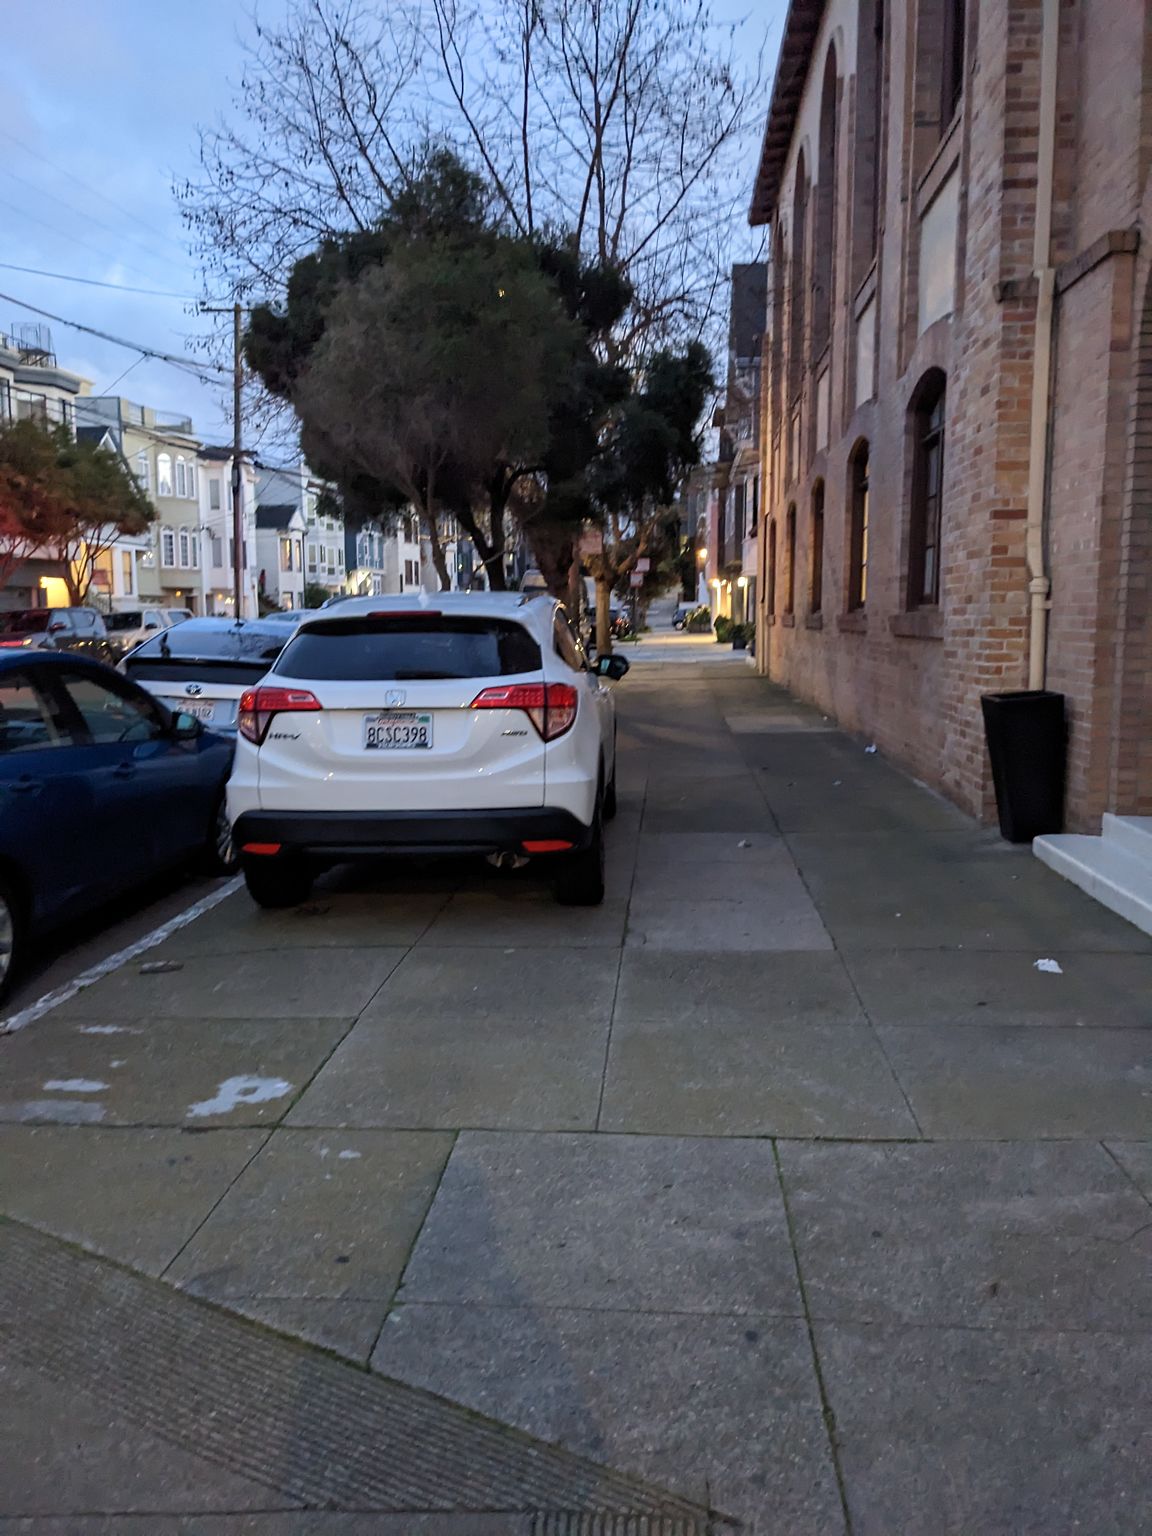 Photo of car in the street with license plate 8CSC398 in California